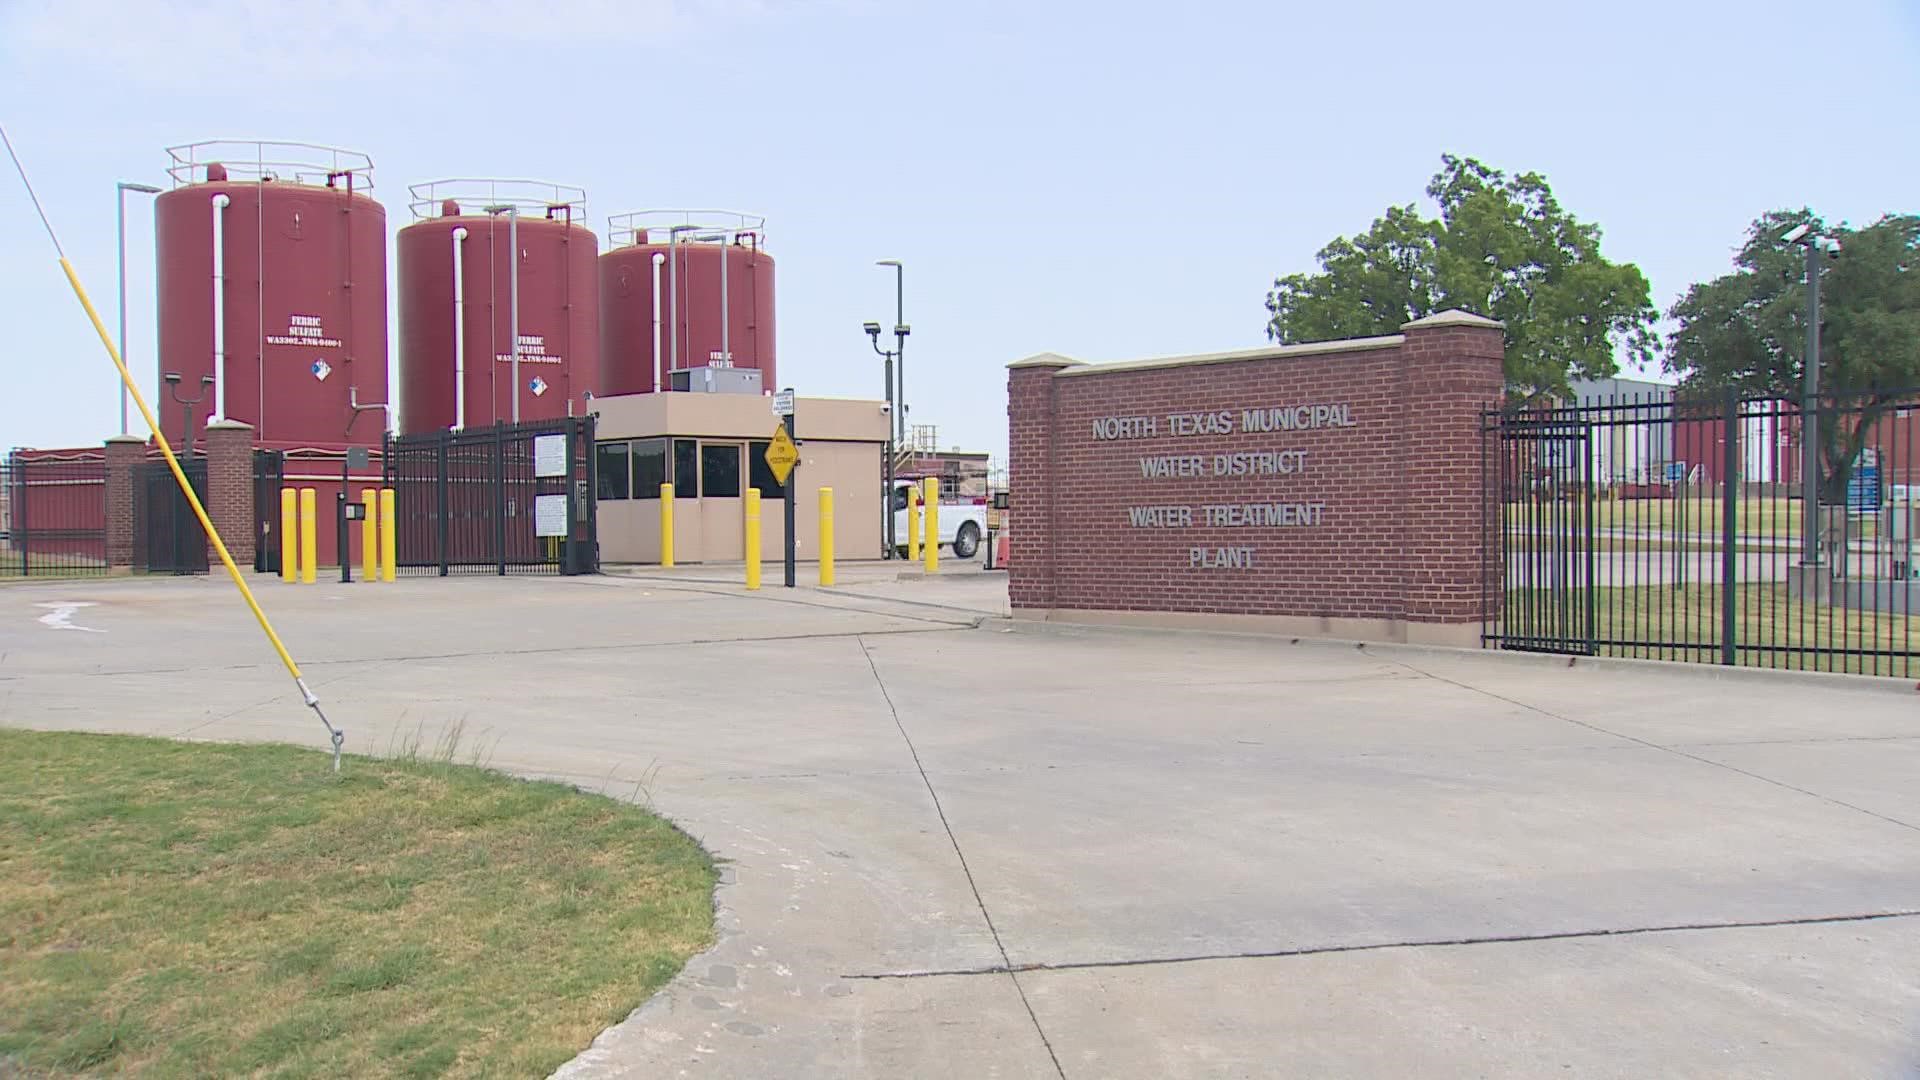 The call for water conservation comes after an issue at one of the North Texas Municipal Water District's treatment plants in Wylie.